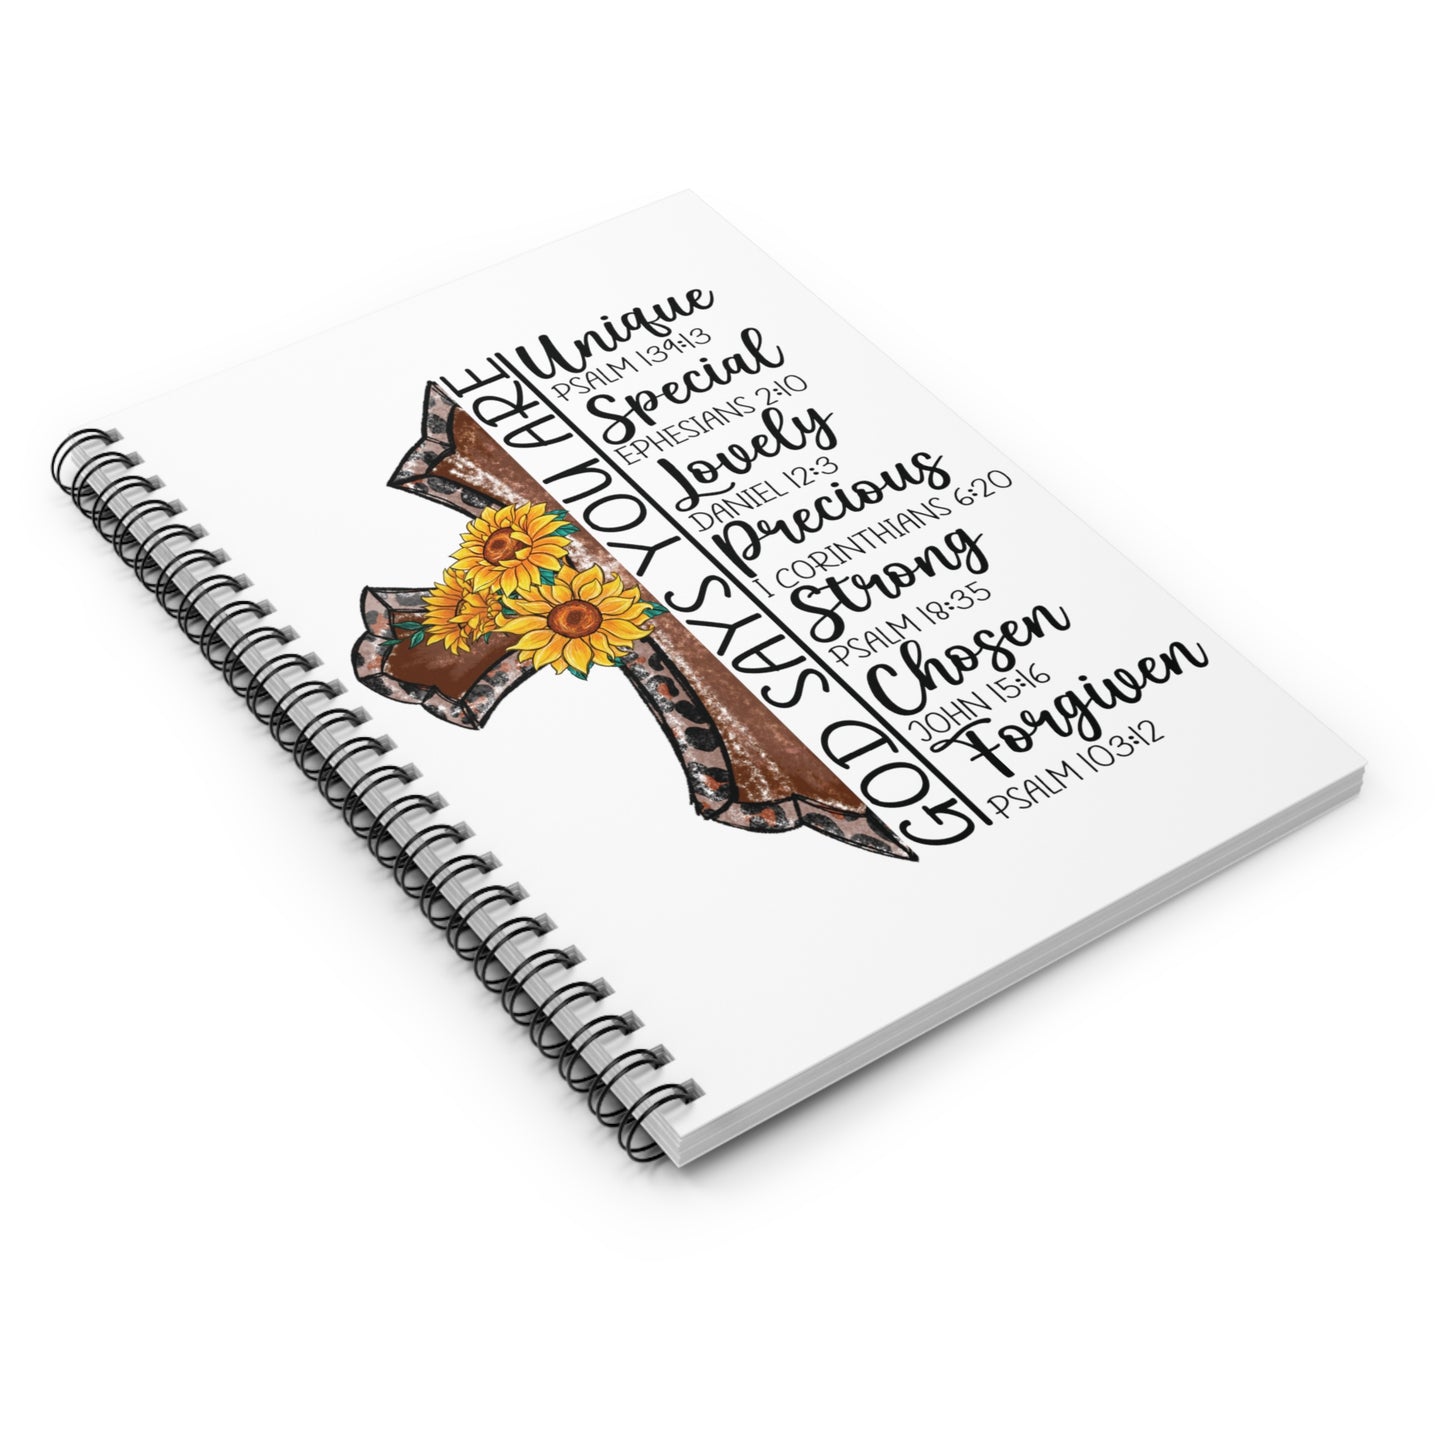 God Says: Spiral Notebook - Log Books - Journals - Diaries - and More Custom Printed by TheGlassyLass